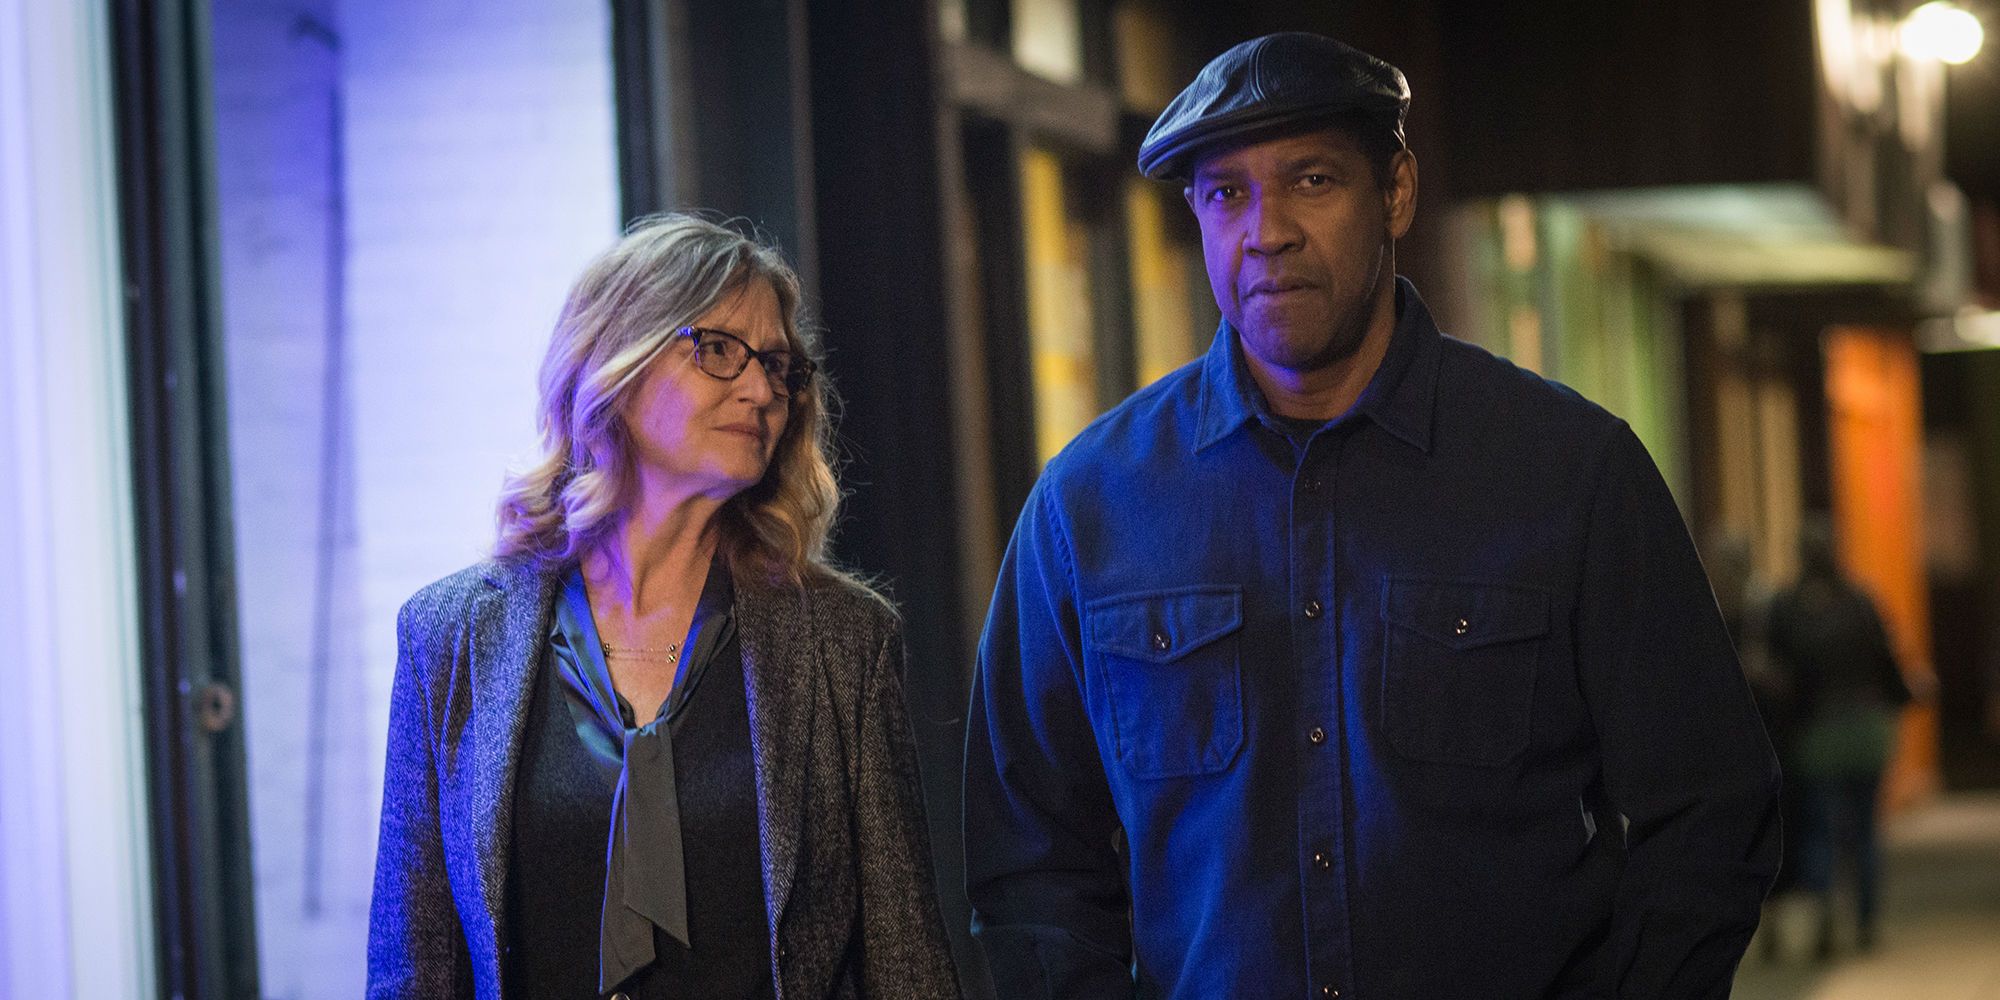 Susan and Robert walking in The Equalizer 2